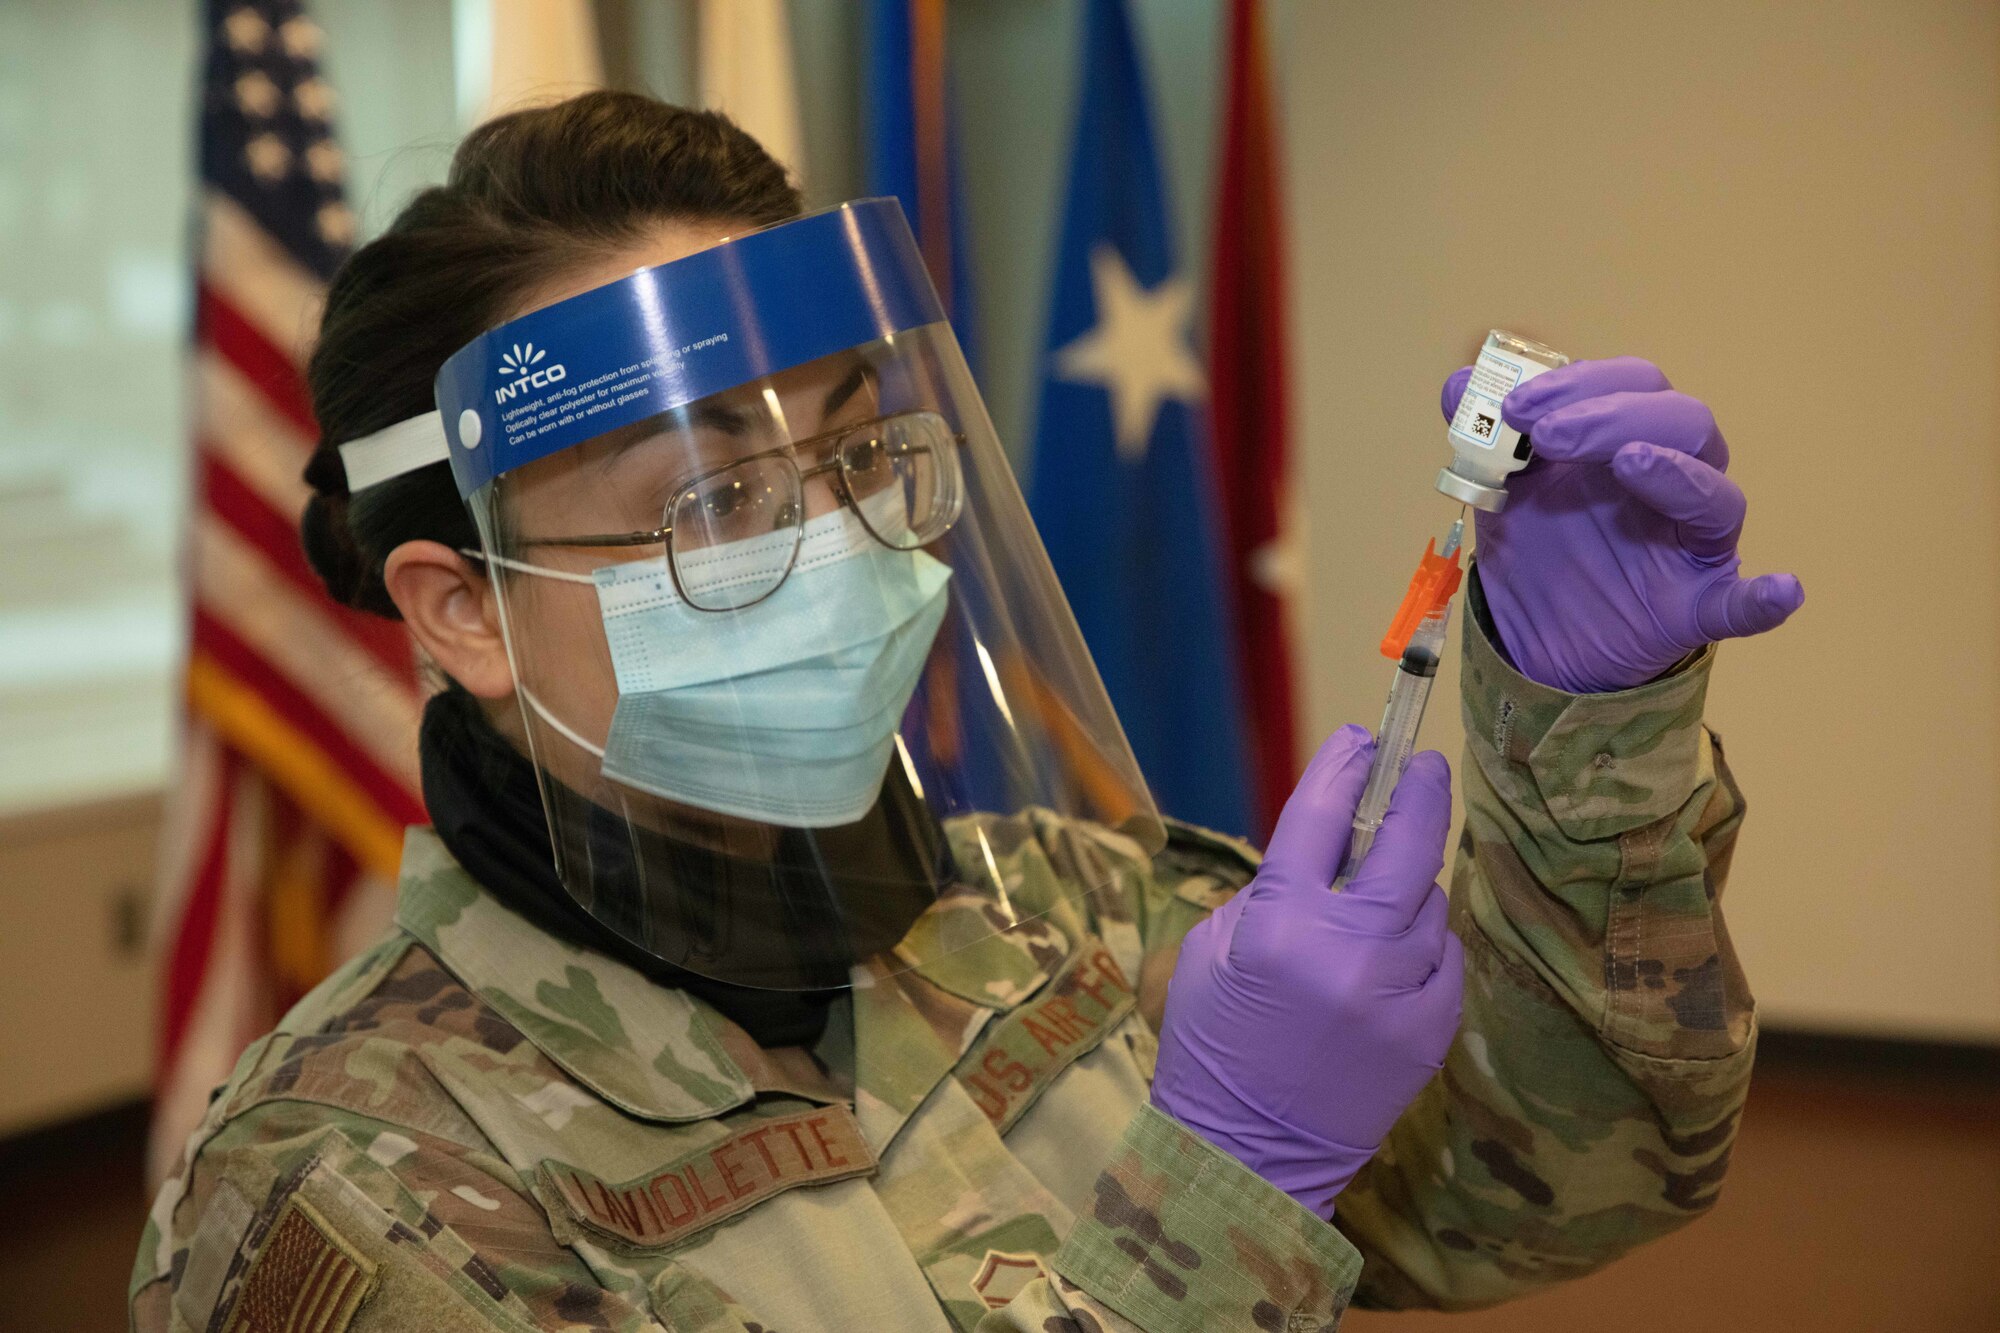 Master Sgt. Chelsea LaViolette, training and education NCOIC for the 102nd Medical Group, Otis Air Force Base, Mass., and an immunization technician for CBRNE Task Force, loads one dose of the new COVID-19 vaccine to inoculate one of the volunteers who will receive it, here, Jan. 4, 2021. The vaccine is currently available to select Soldiers and Airmen based off of risk and mission requirements, but will be available widely as supplies increase. (Massachusetts National Guard Photo by Sgt. Tricia Andriski)